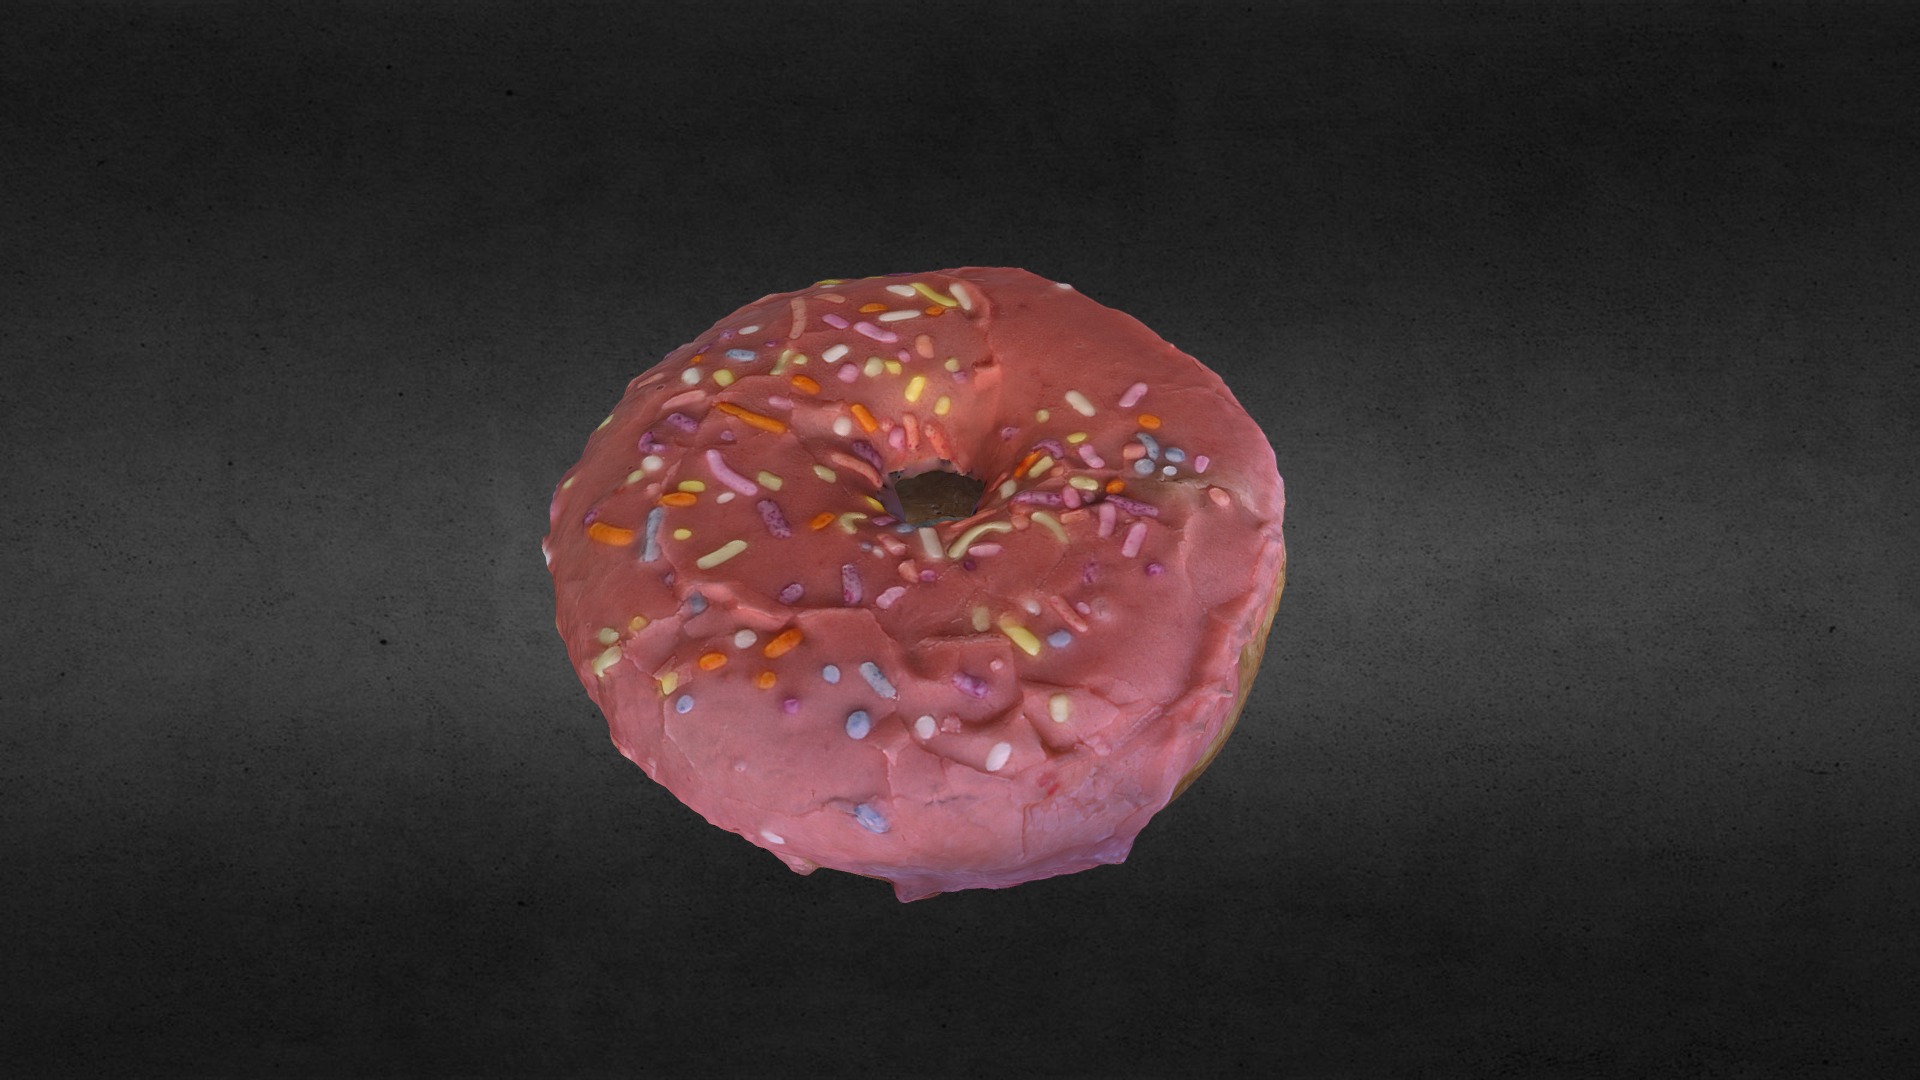 3D model Homer donut - This is a 3D model of the Homer donut. The 3D model is about a donut with sprinkles on it.